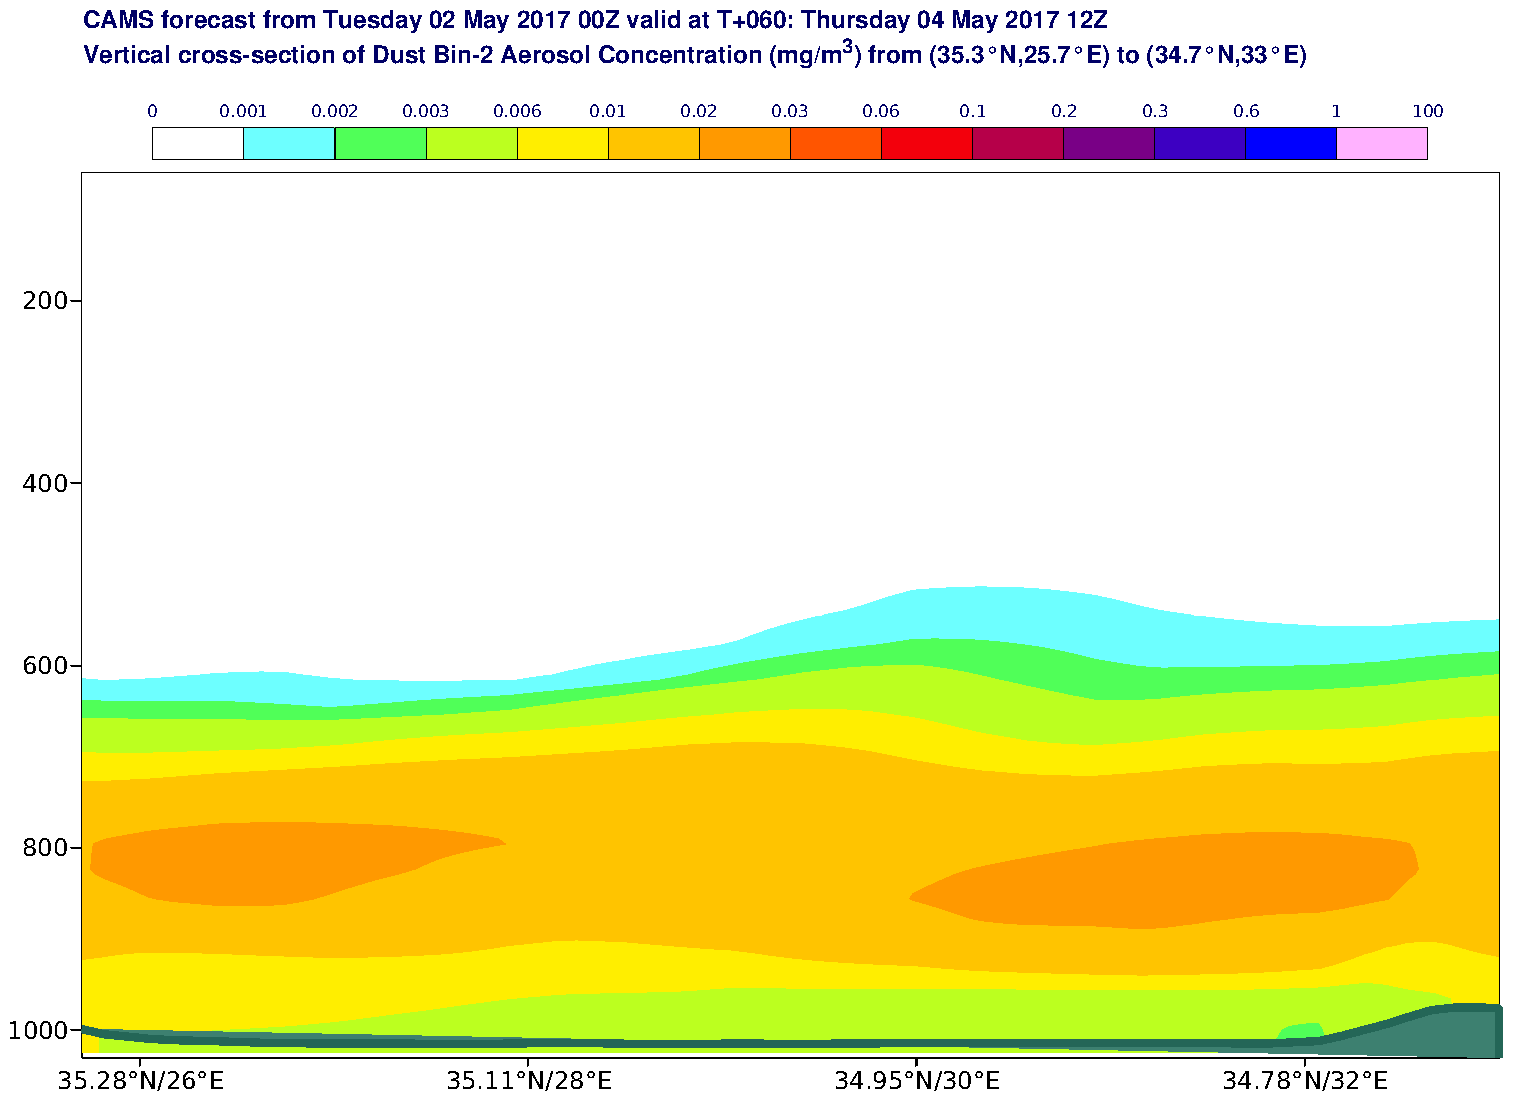 Vertical cross-section of Dust Bin-2 Aerosol Concentration (mg/m3) valid at T60 - 2017-05-04 12:00